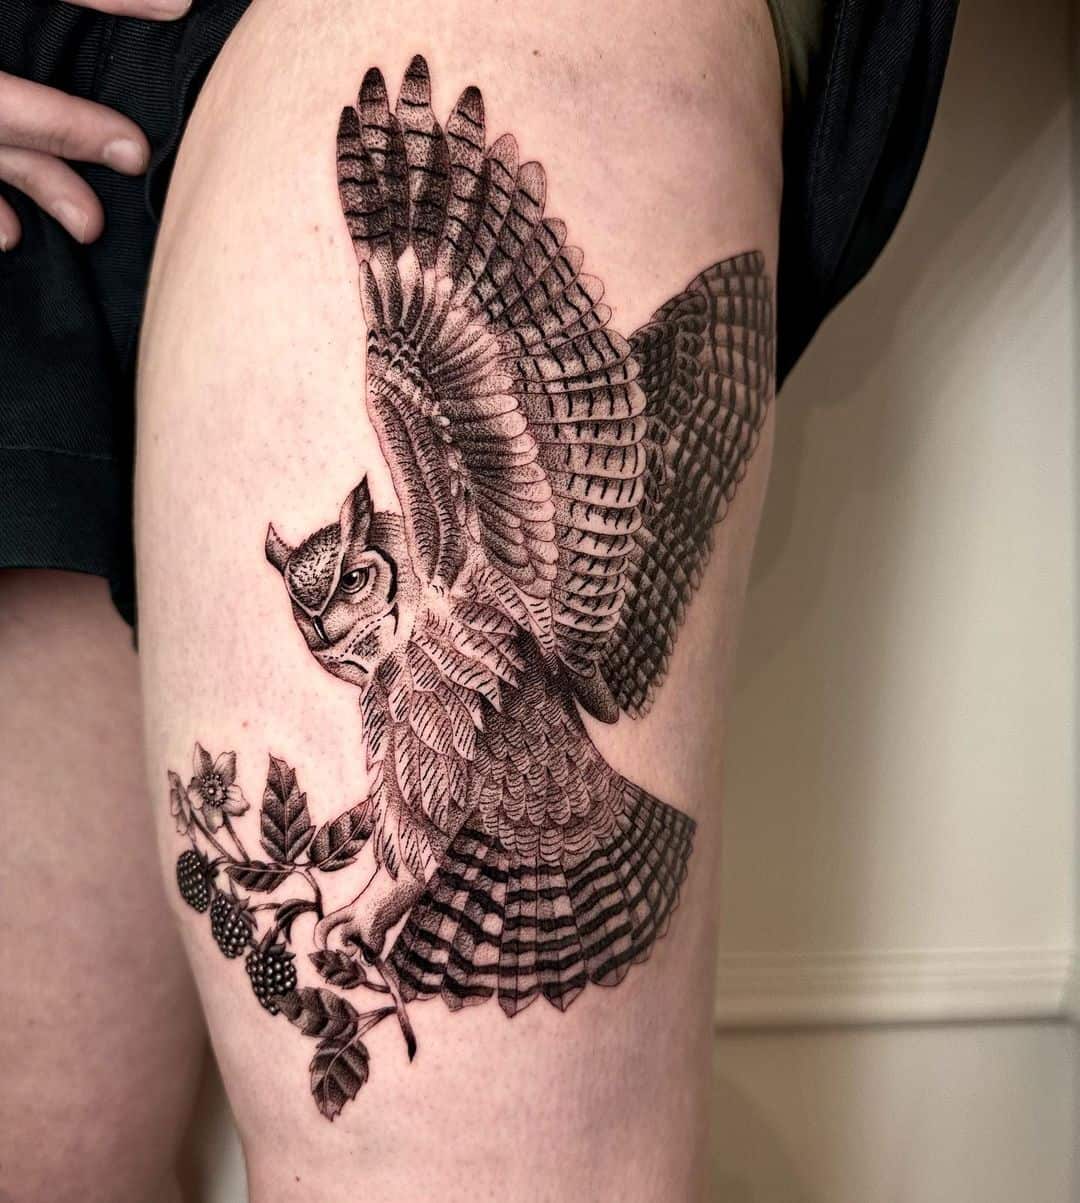 Black and grey owl tattoo by wrenling